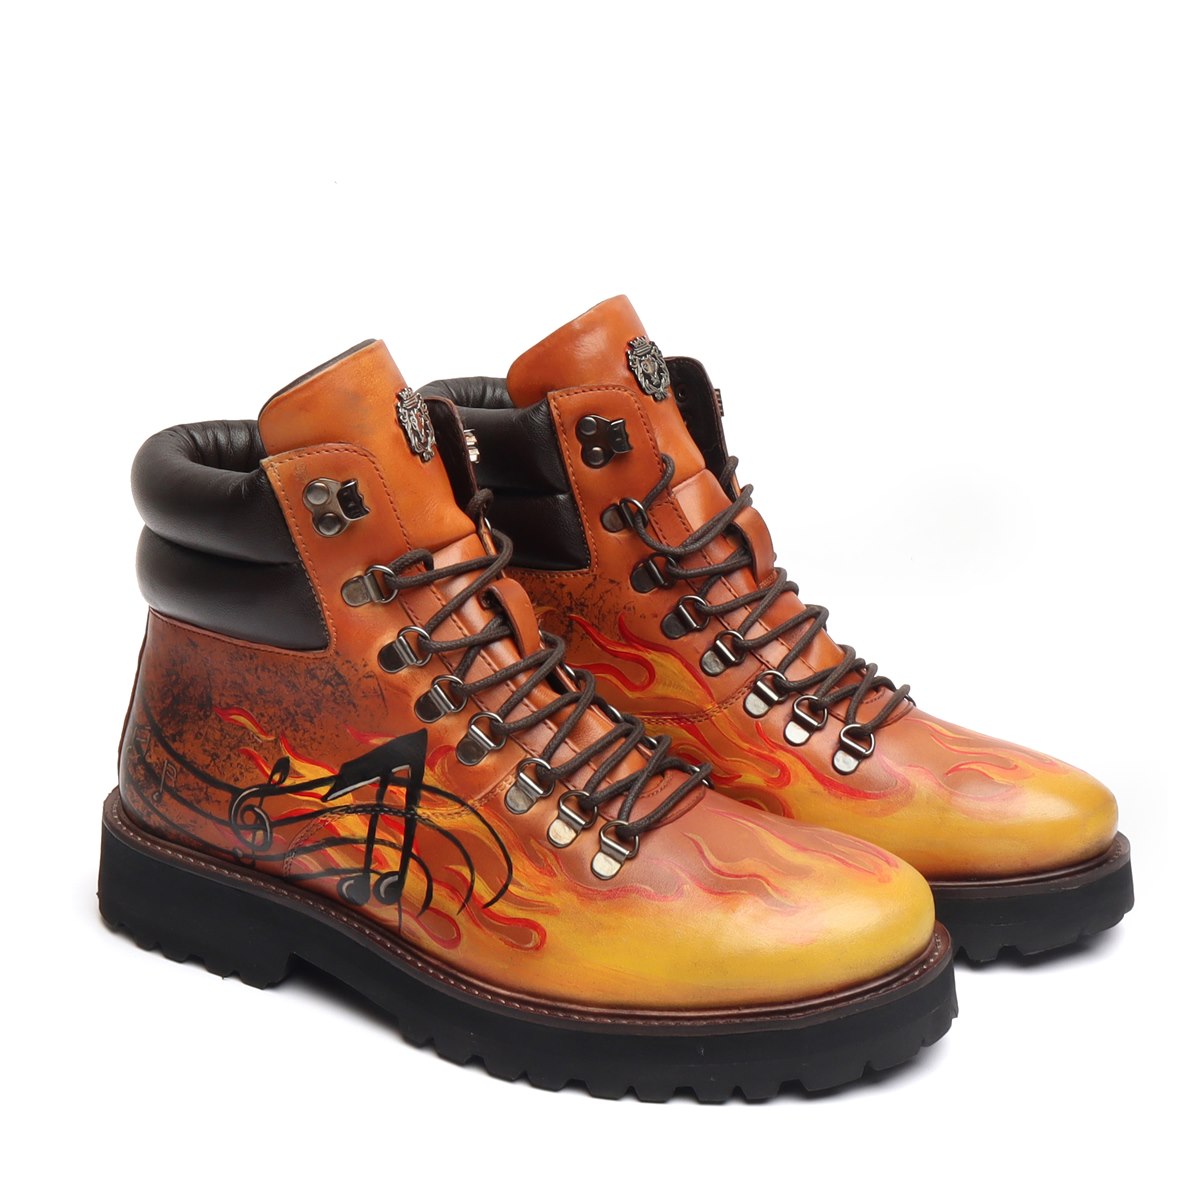 Light Weight Biker Boot for Men with Hand Painted Fire and Music Art T